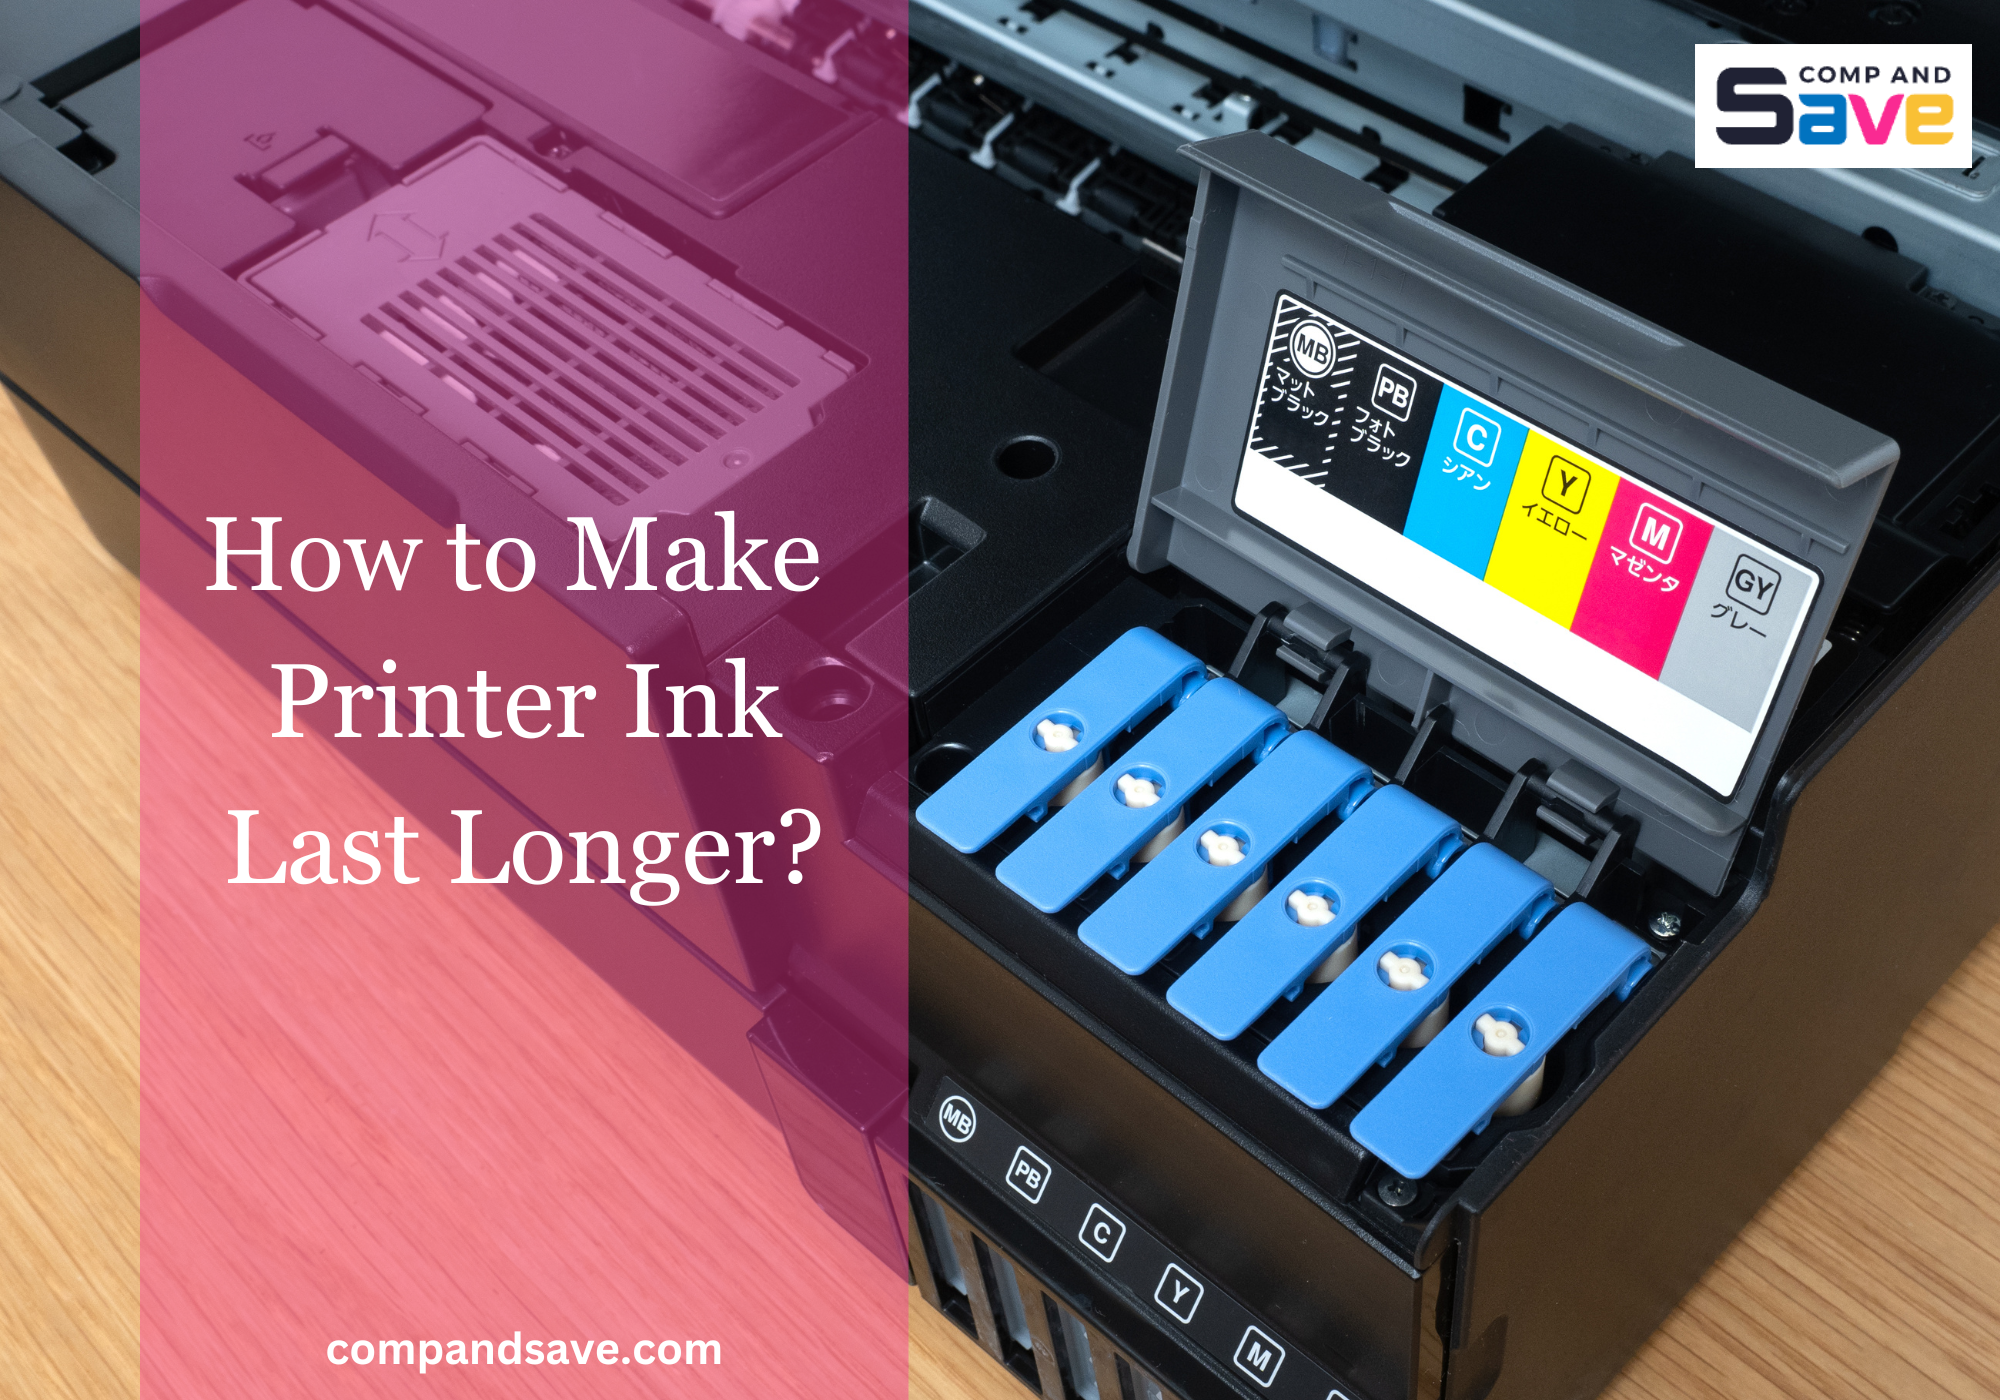 image from How to Make Printer Ink Last Longer: 5 Easy Ways